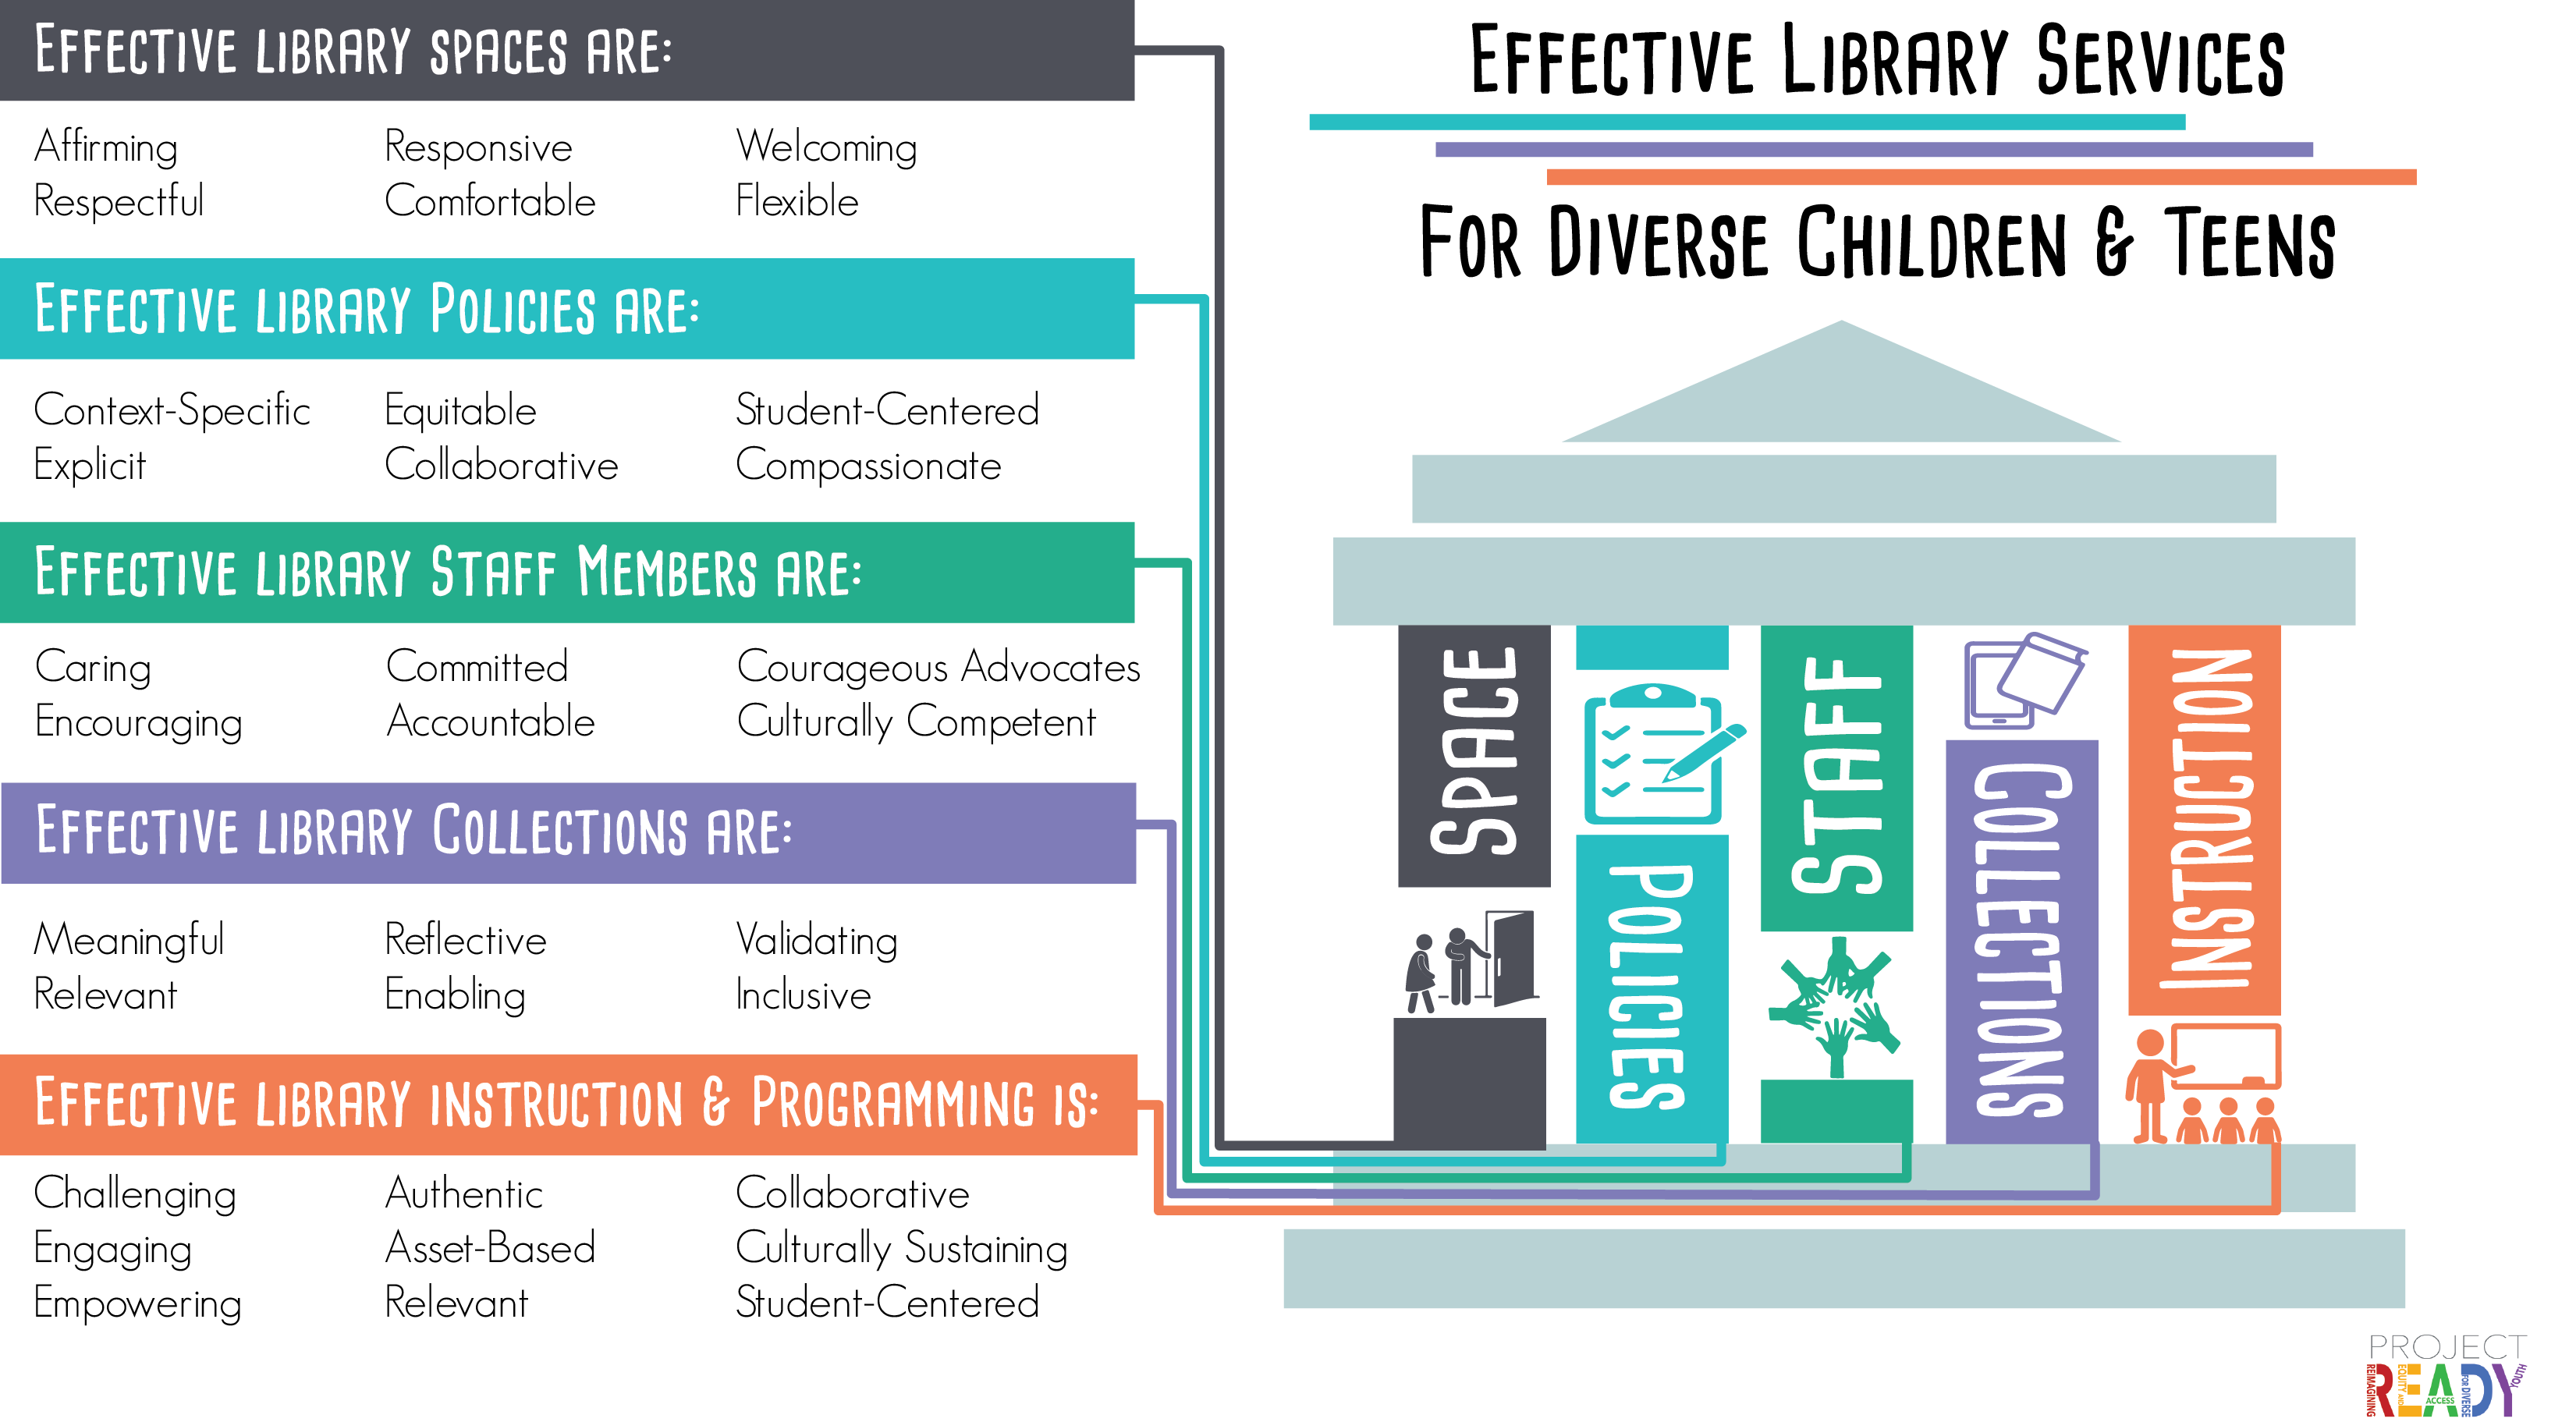 Effective Libraries for Diverse Children and Teens (Characteristics of effective library services are listed below.)